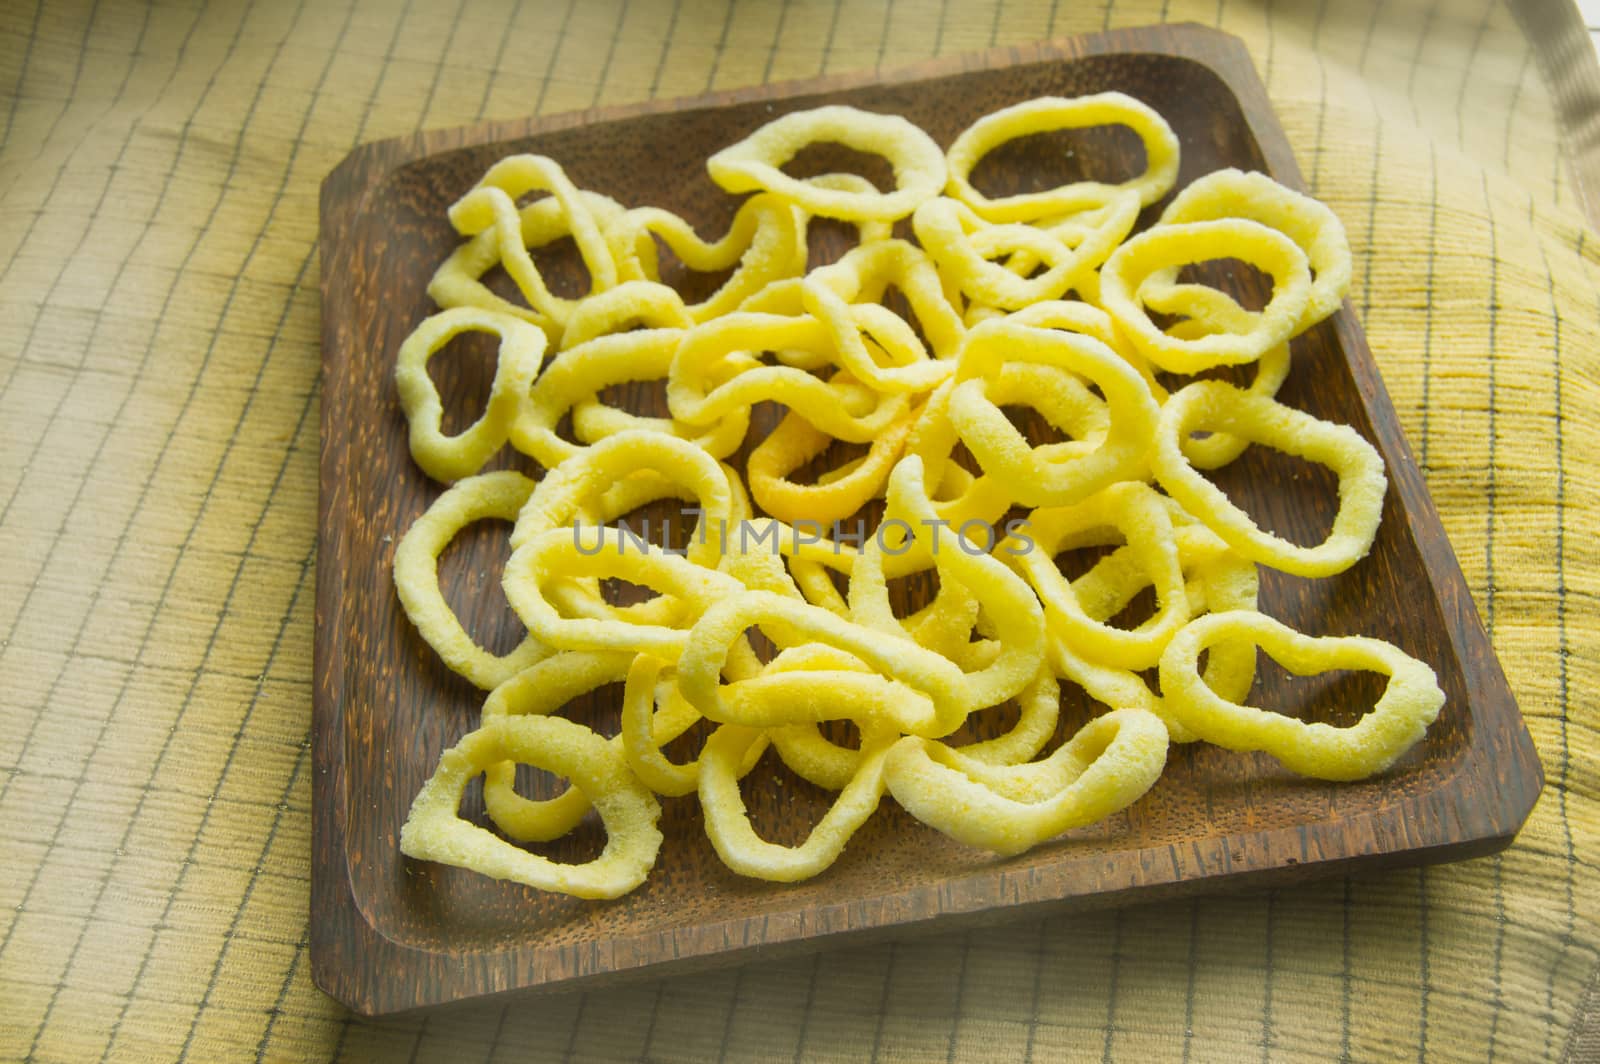 Delicious crispy rings of onion chips lie on a dark wooden plate on a yellow napkin background.